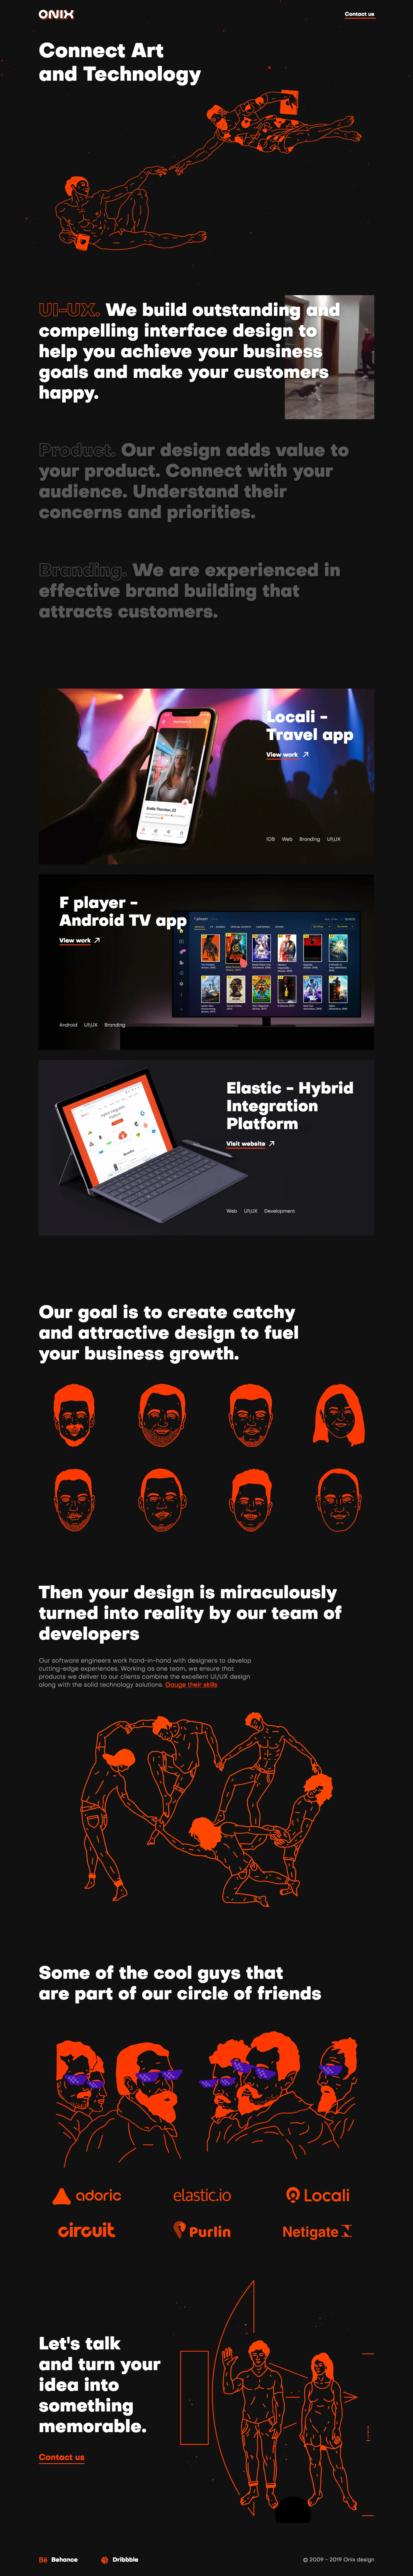 Onix Design Landing Page Example: A team of talented designers in love with creating brand identities, logos, websites, illustrations and animations